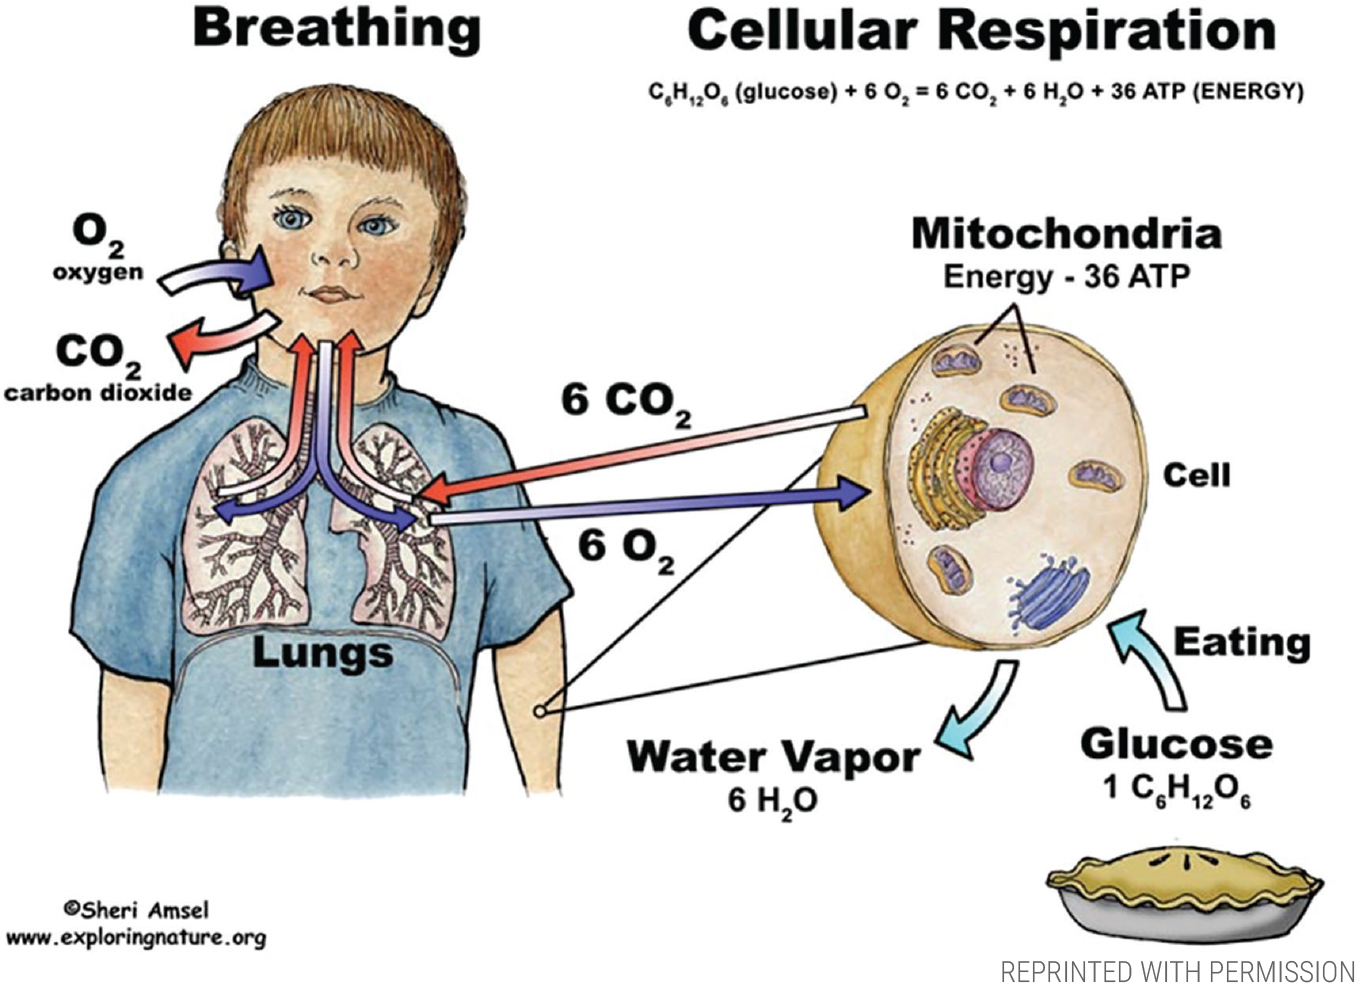 Diagram showing breathing and cellular respiration processes.